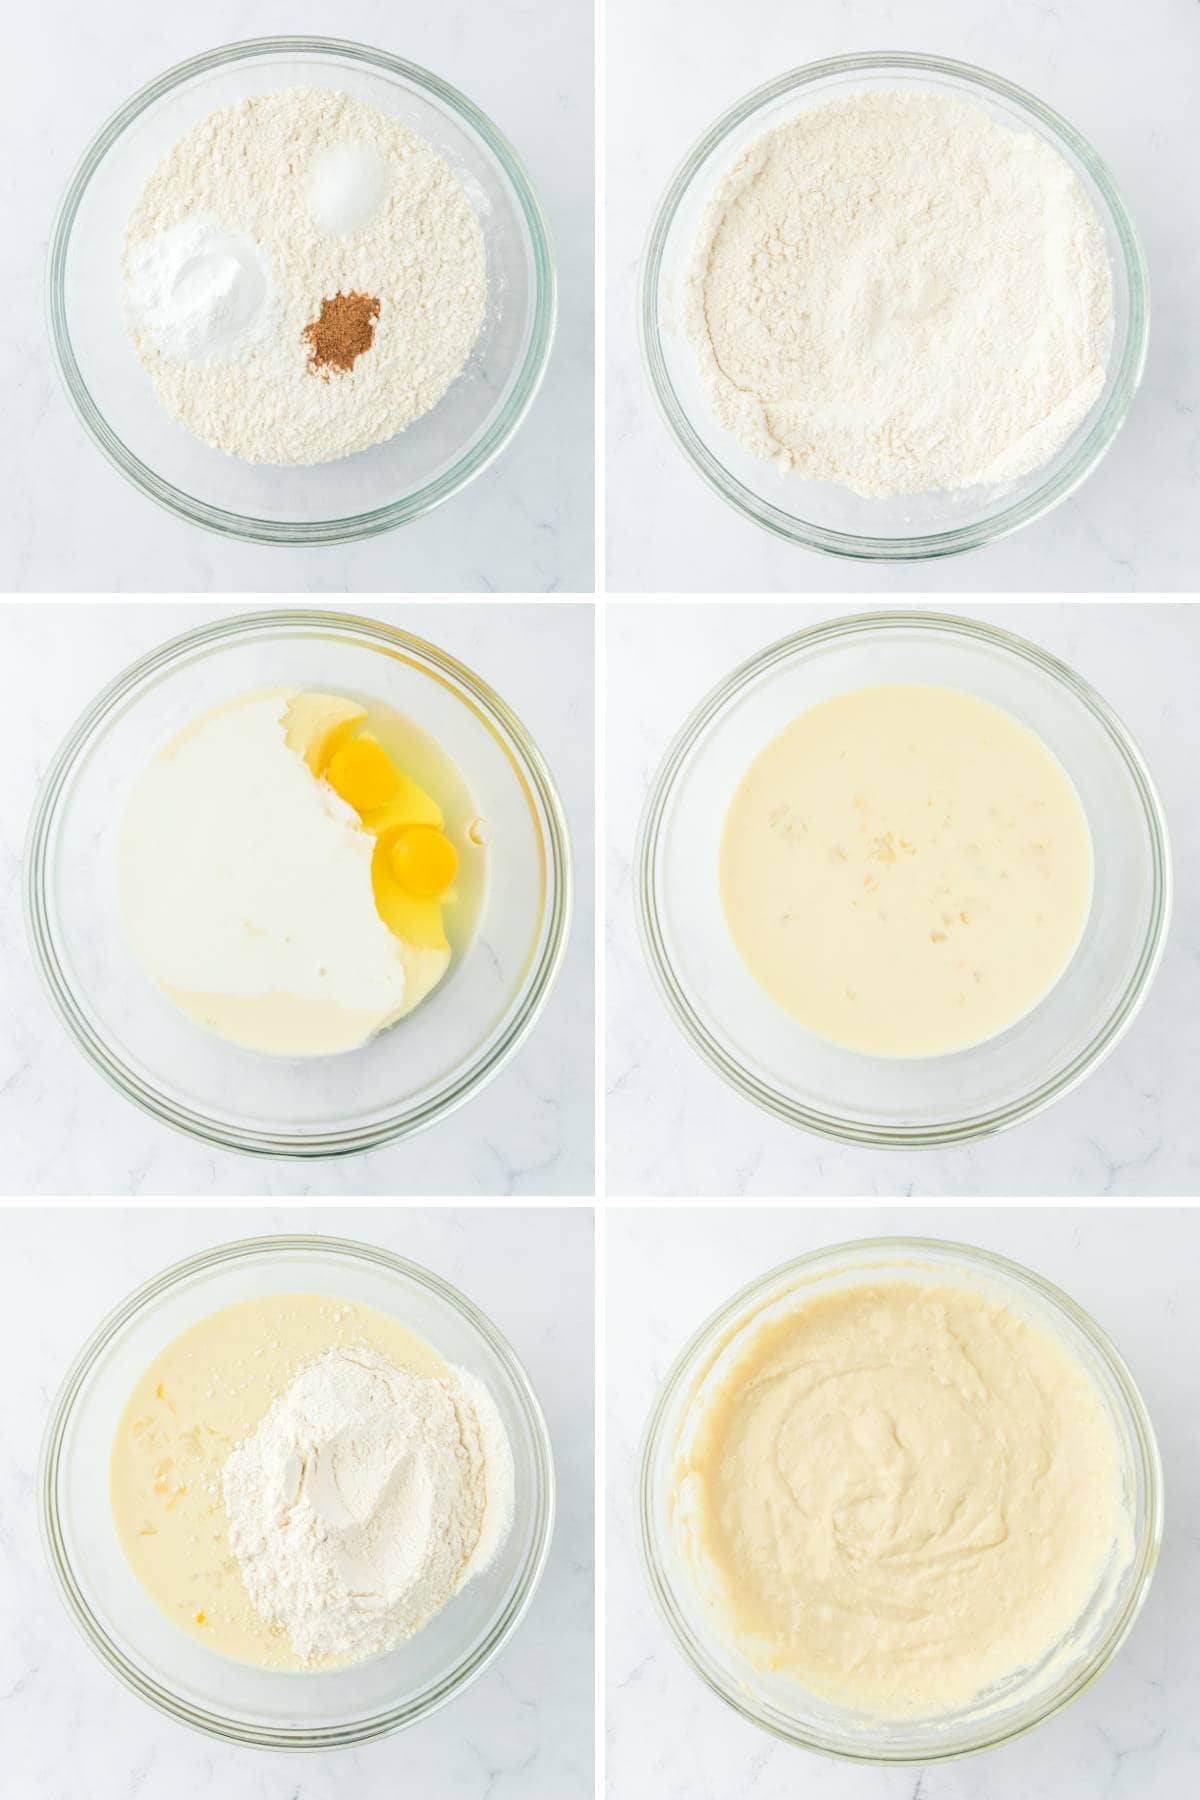 A collage of images showing the different stages of mixing the eggnog pancake batter.